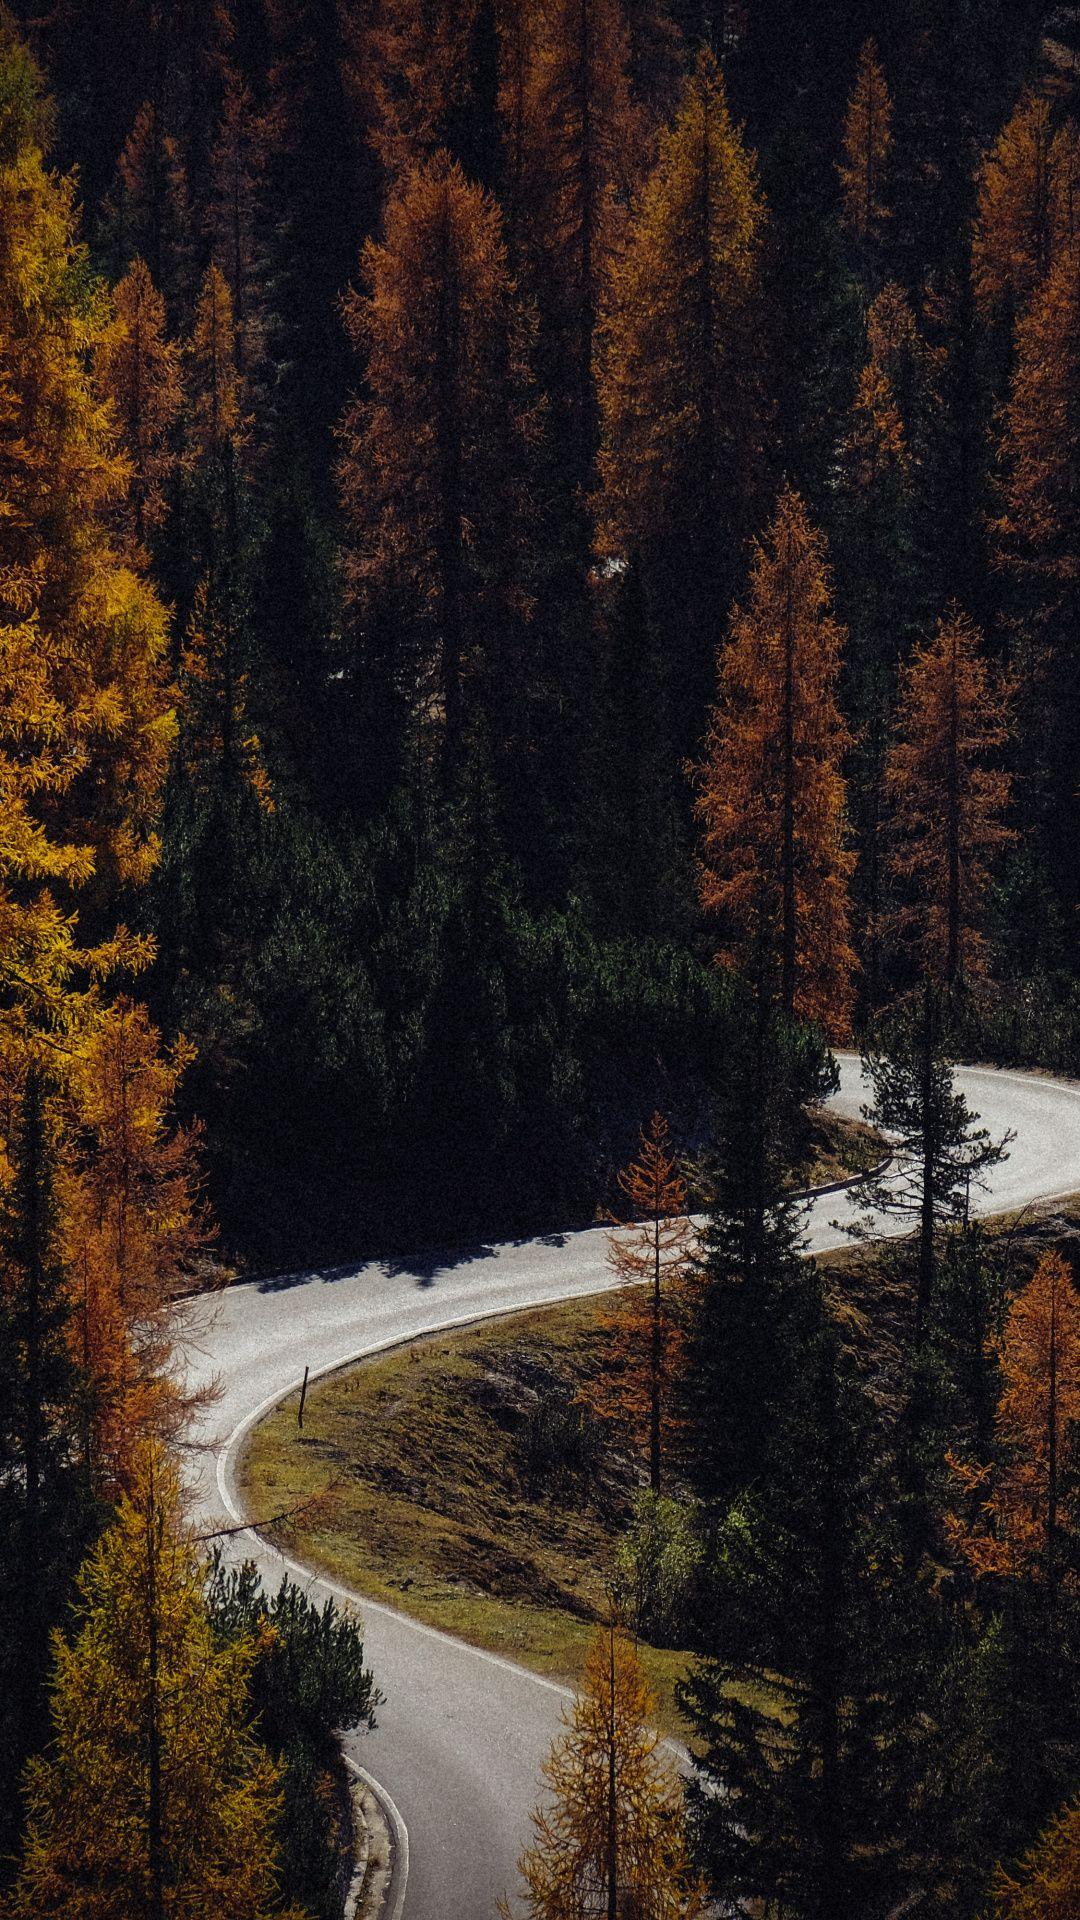 Autumn, road, turns, forest, nature wallpaper. WALL in 2019